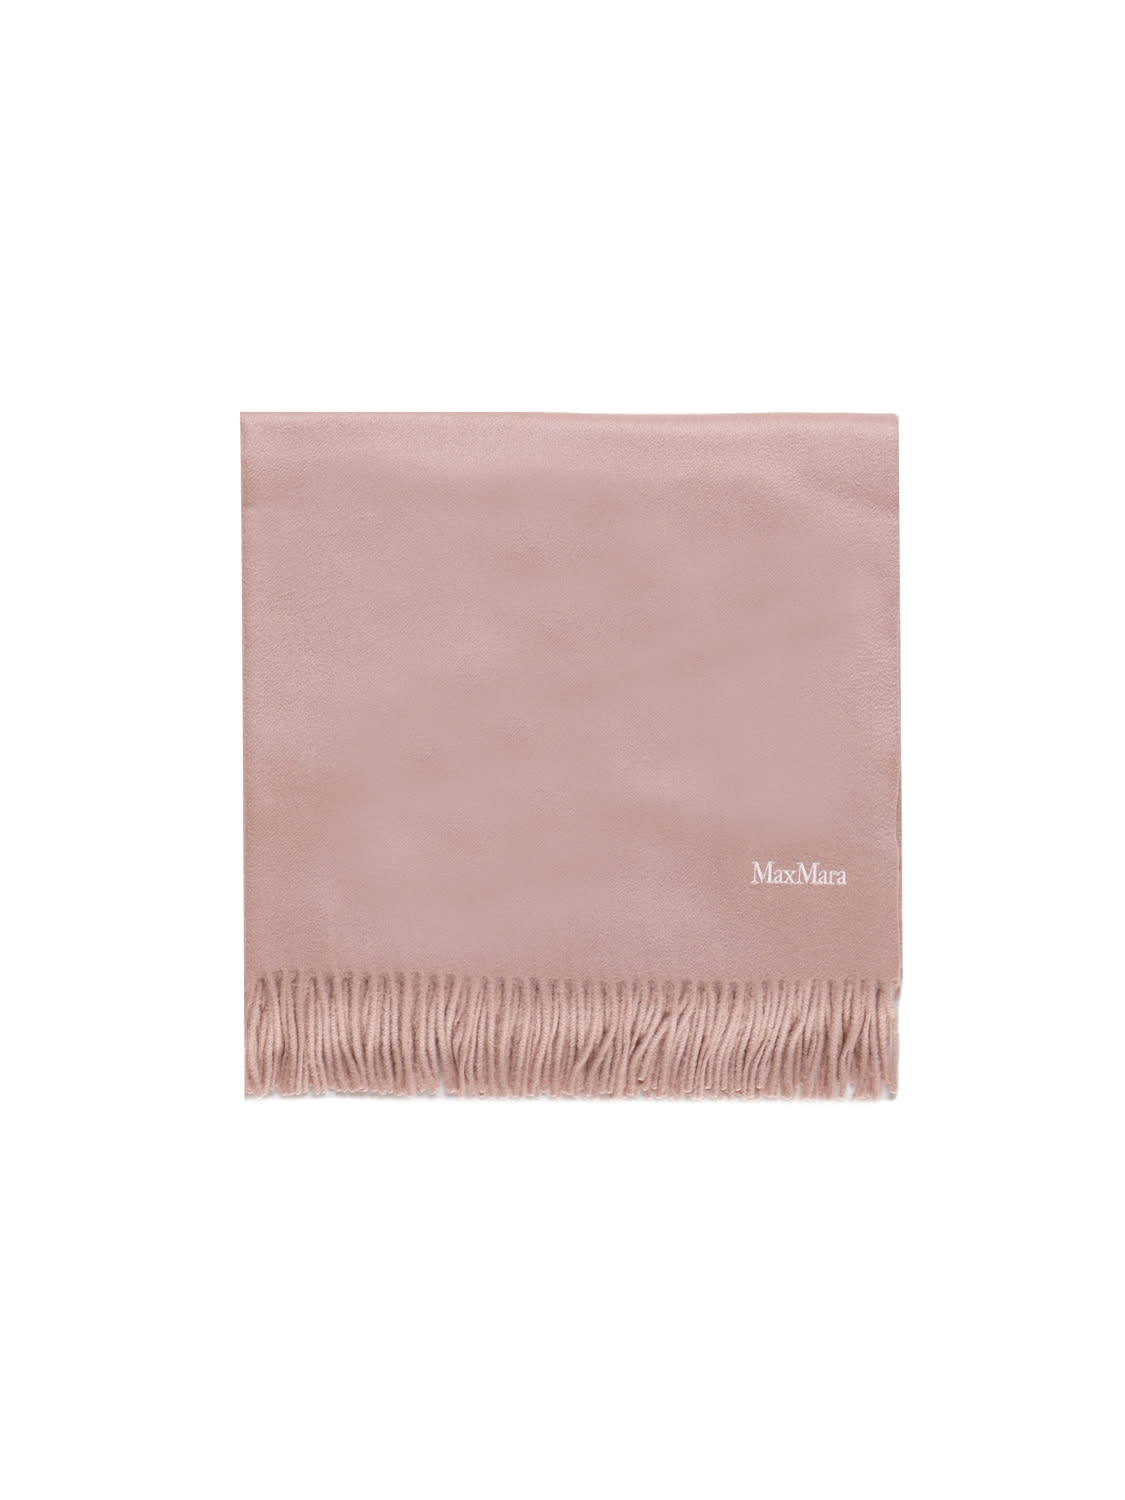 Max Mara Stole In Pure Sable Cashmere In Pink